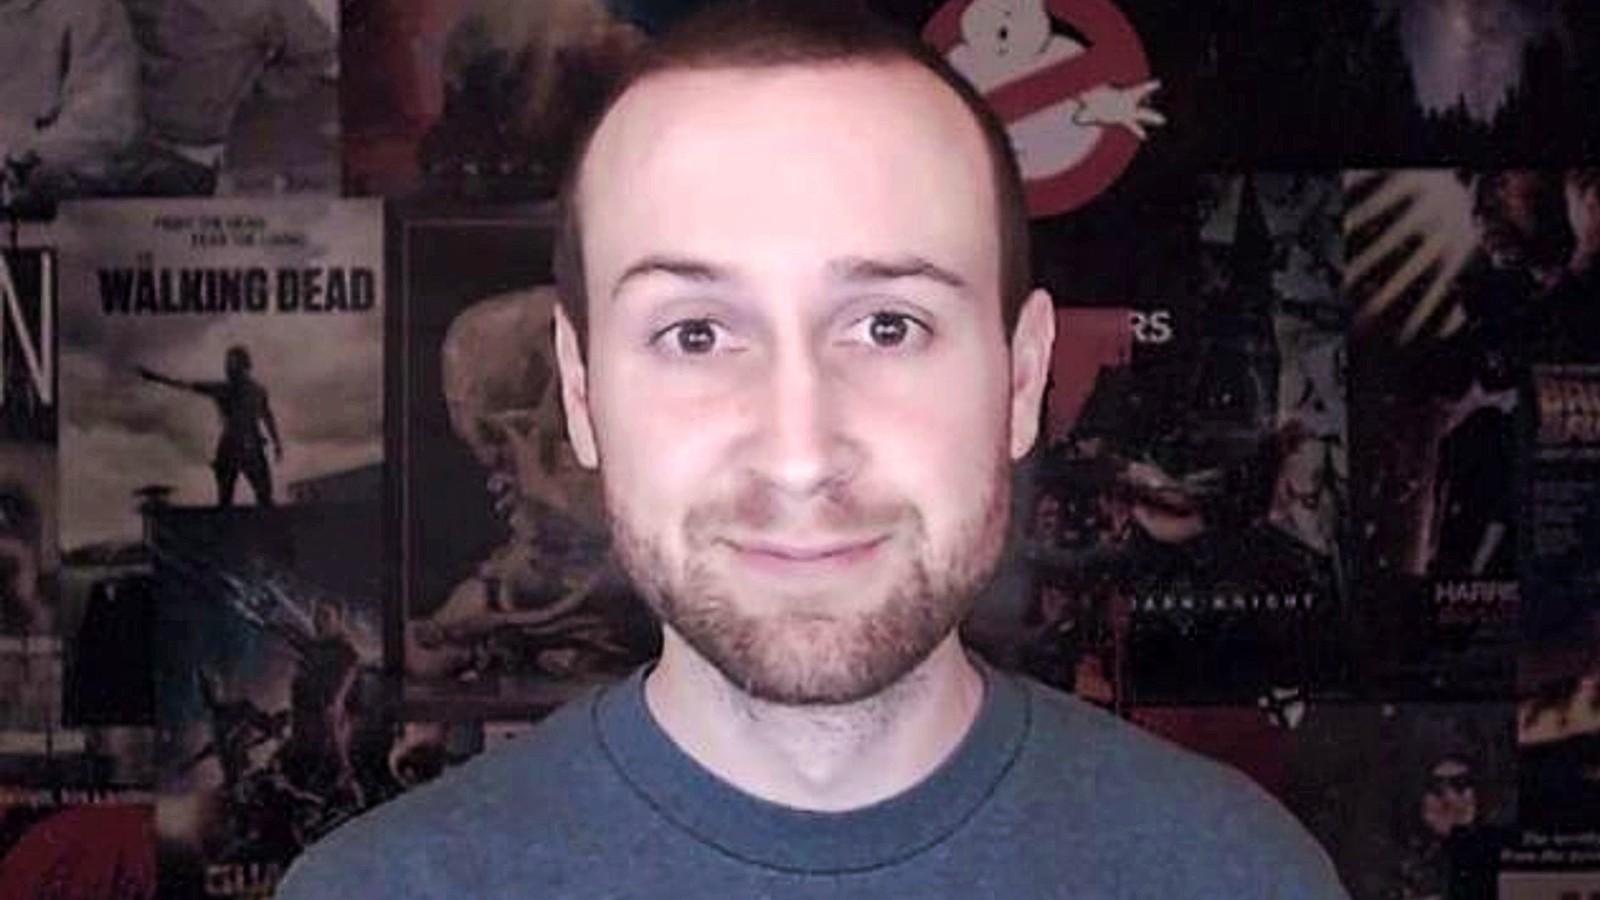 SeaNanners in a YouTube video